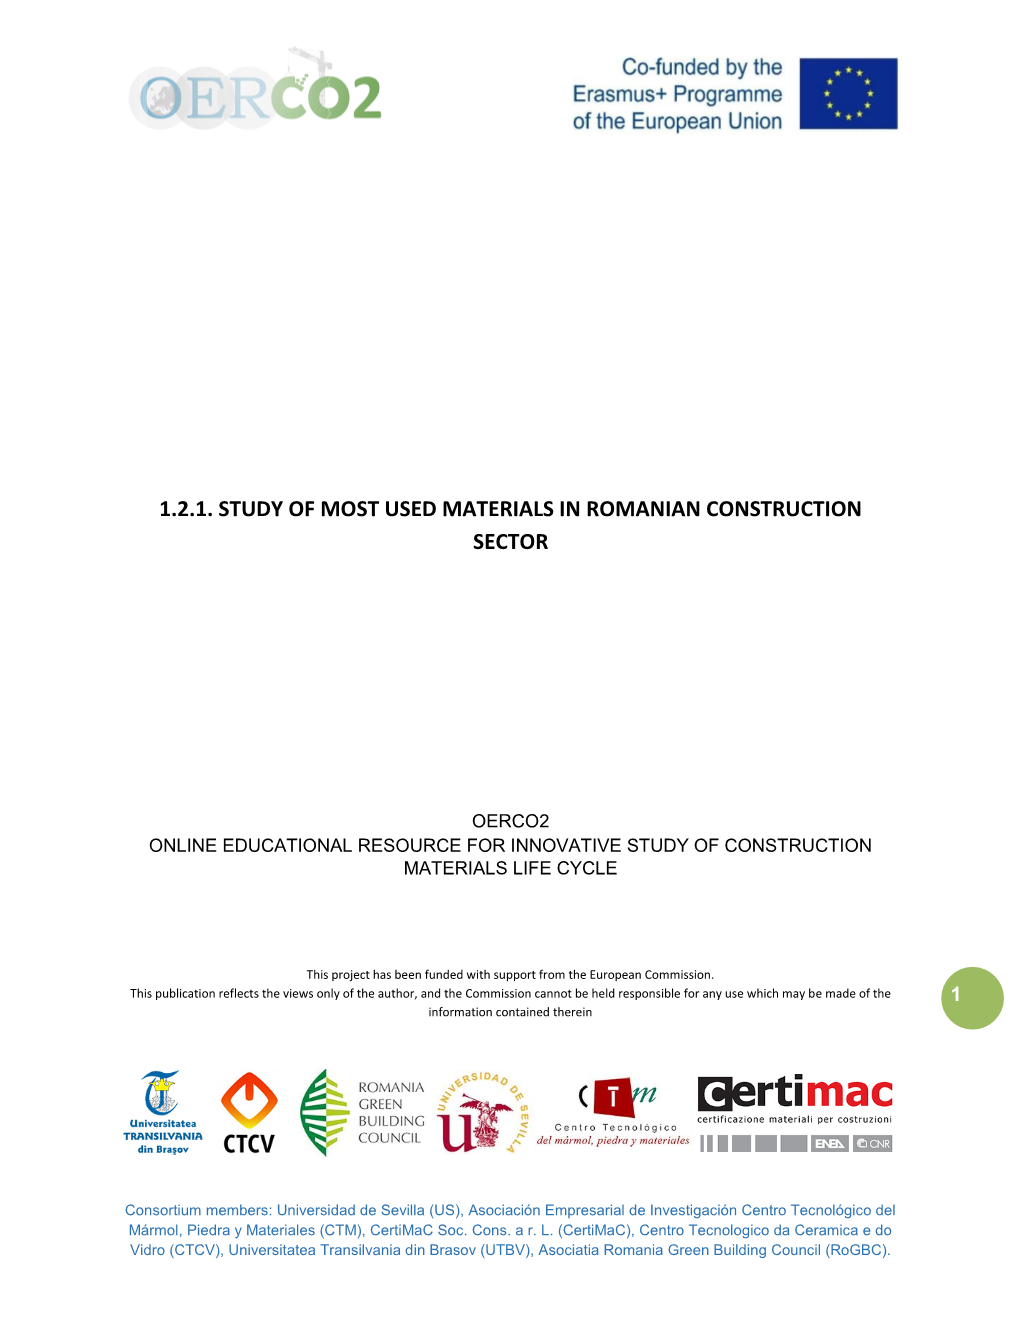 1.2.1. Study of Most Used Materials in Romanian Construction Sector